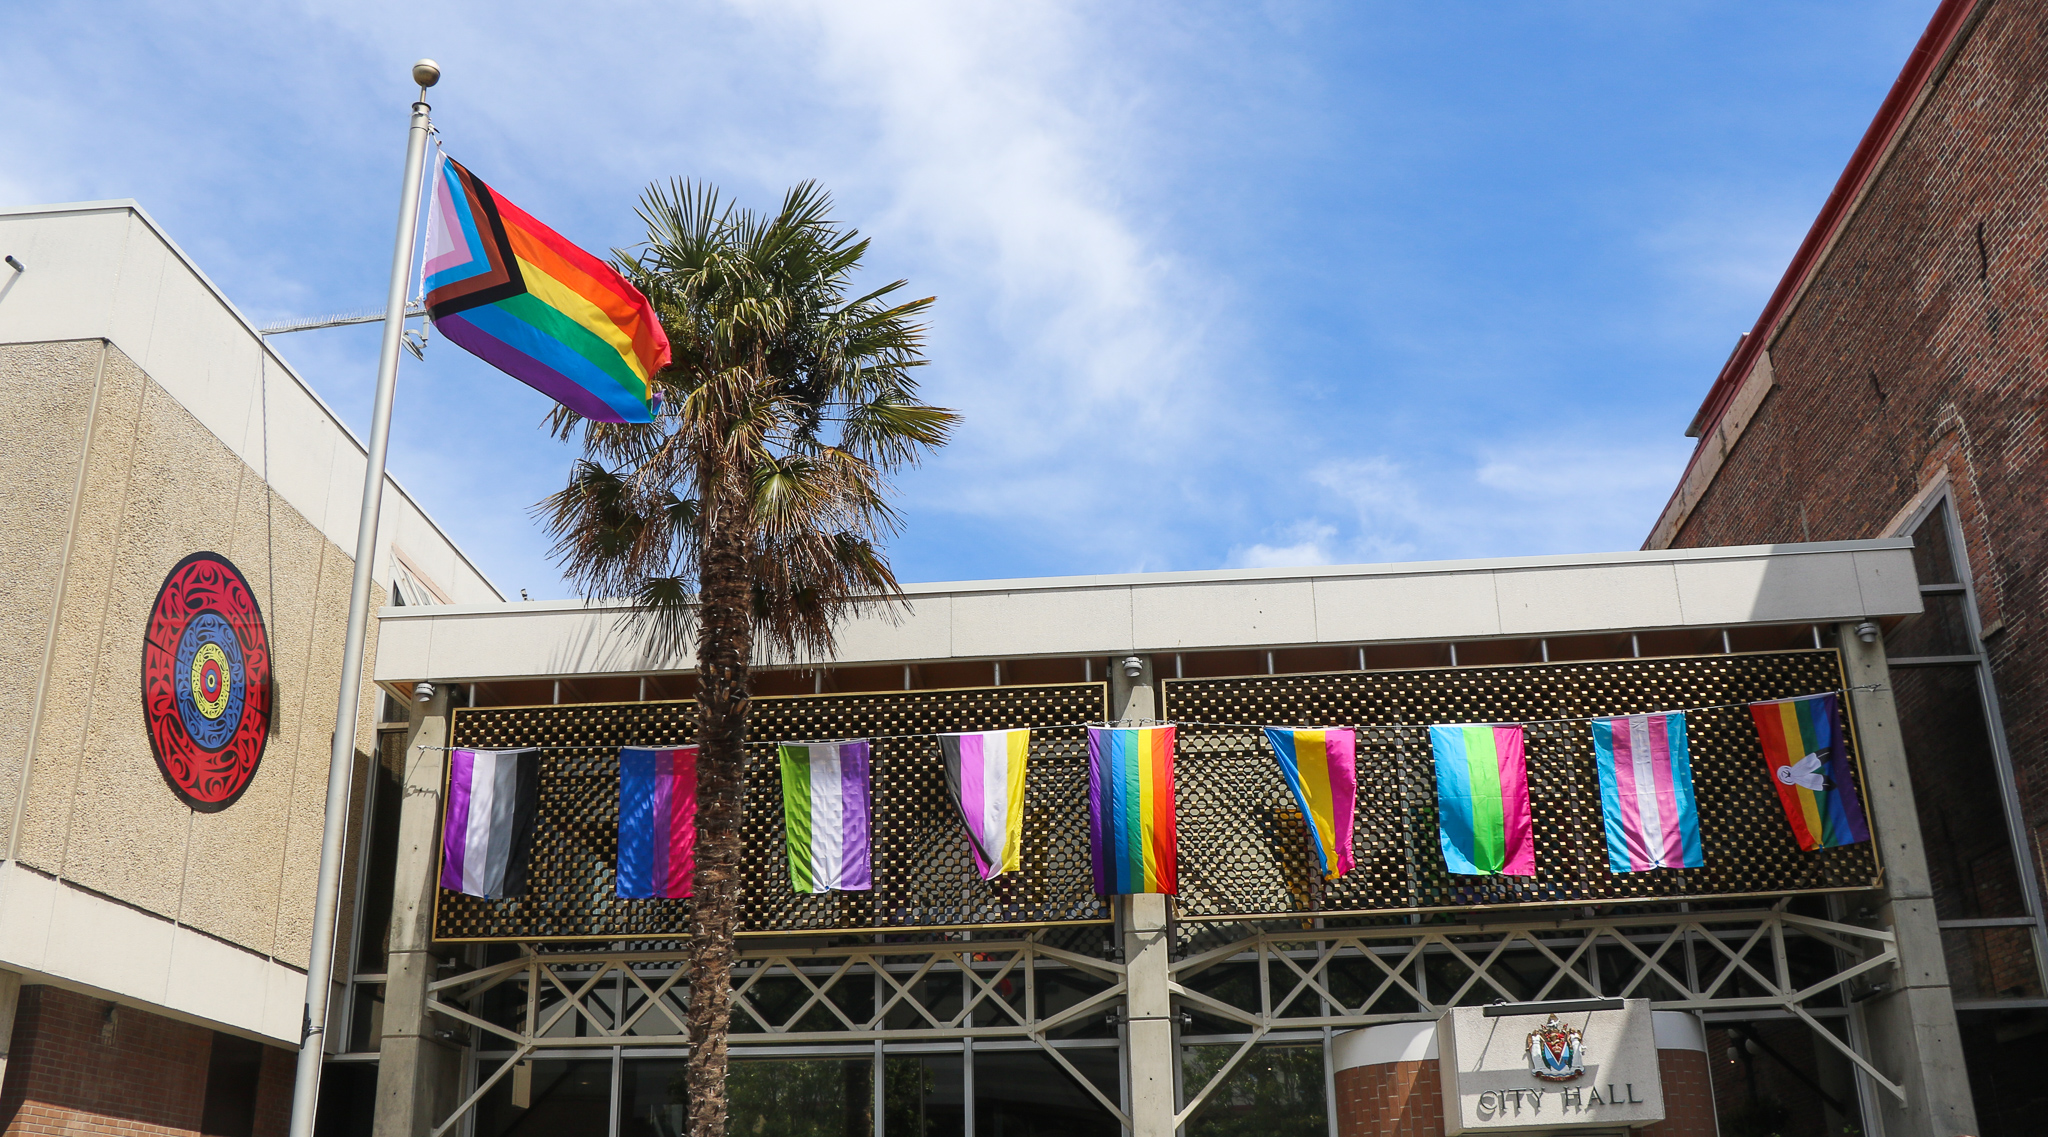 A Pride flag on top of a flag pole waves in the wind outside Victoria City Hall, where other smaller Pride flags are hung up on the building